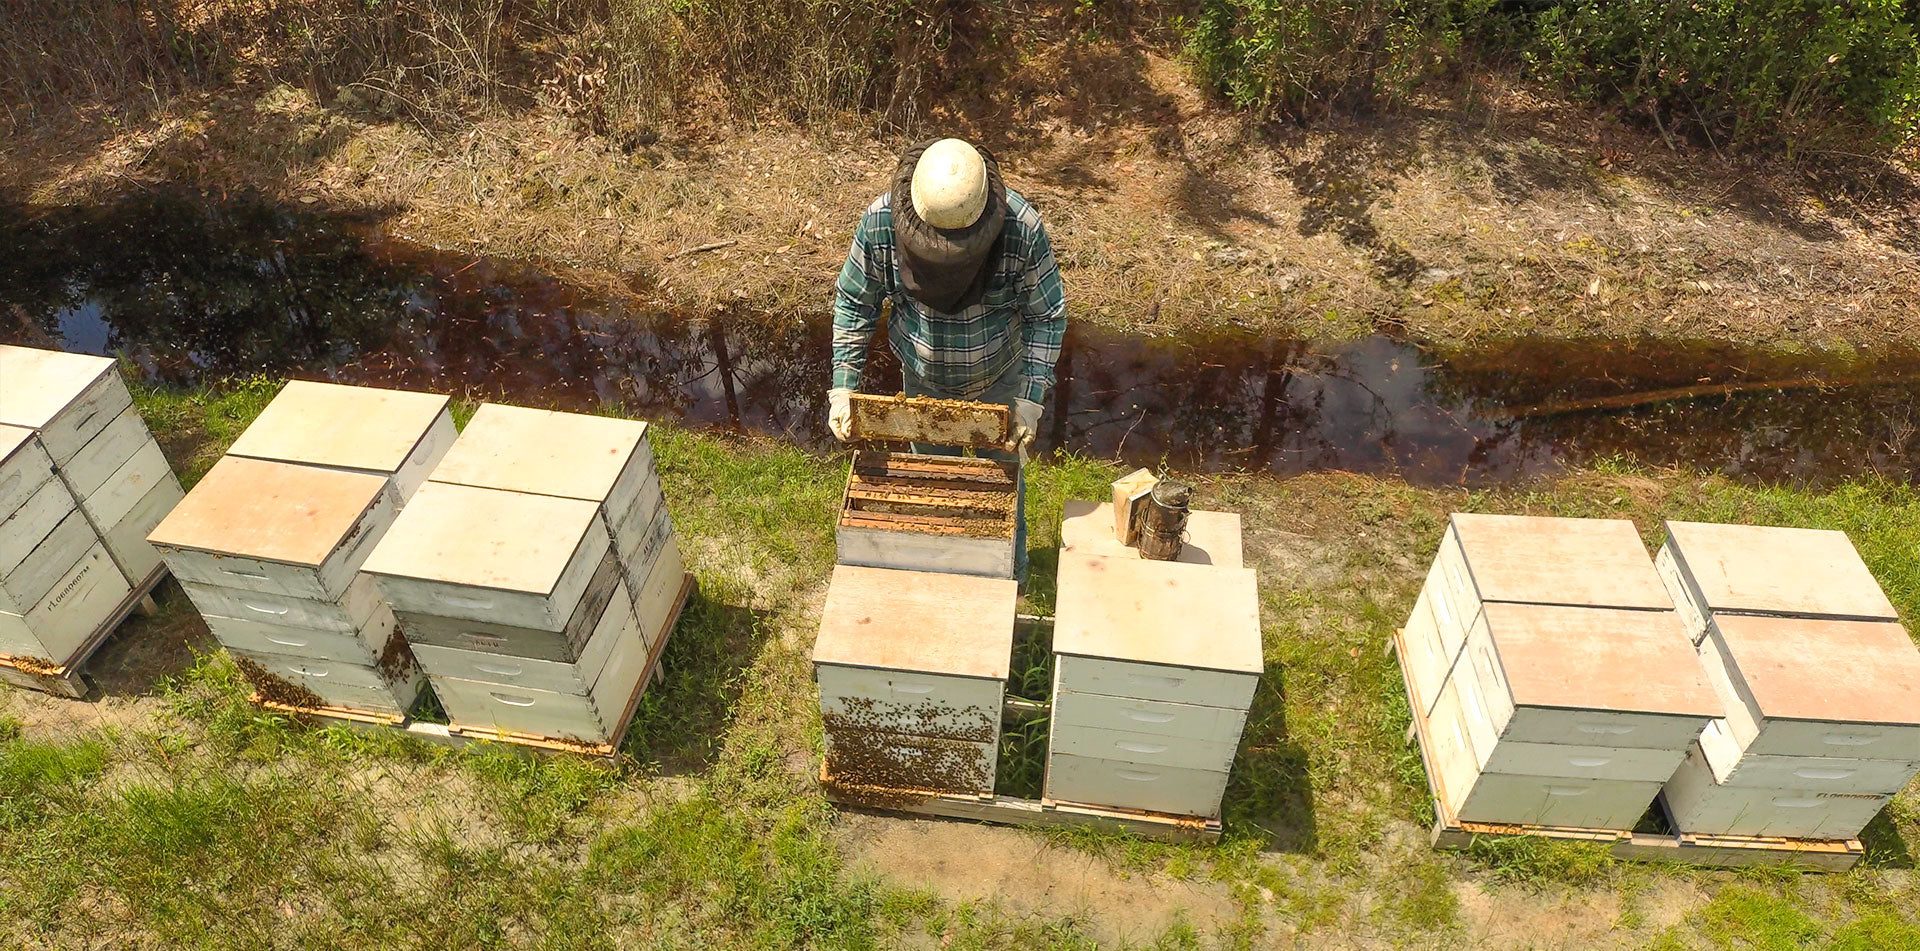 a beekeeper around several beehives in a field